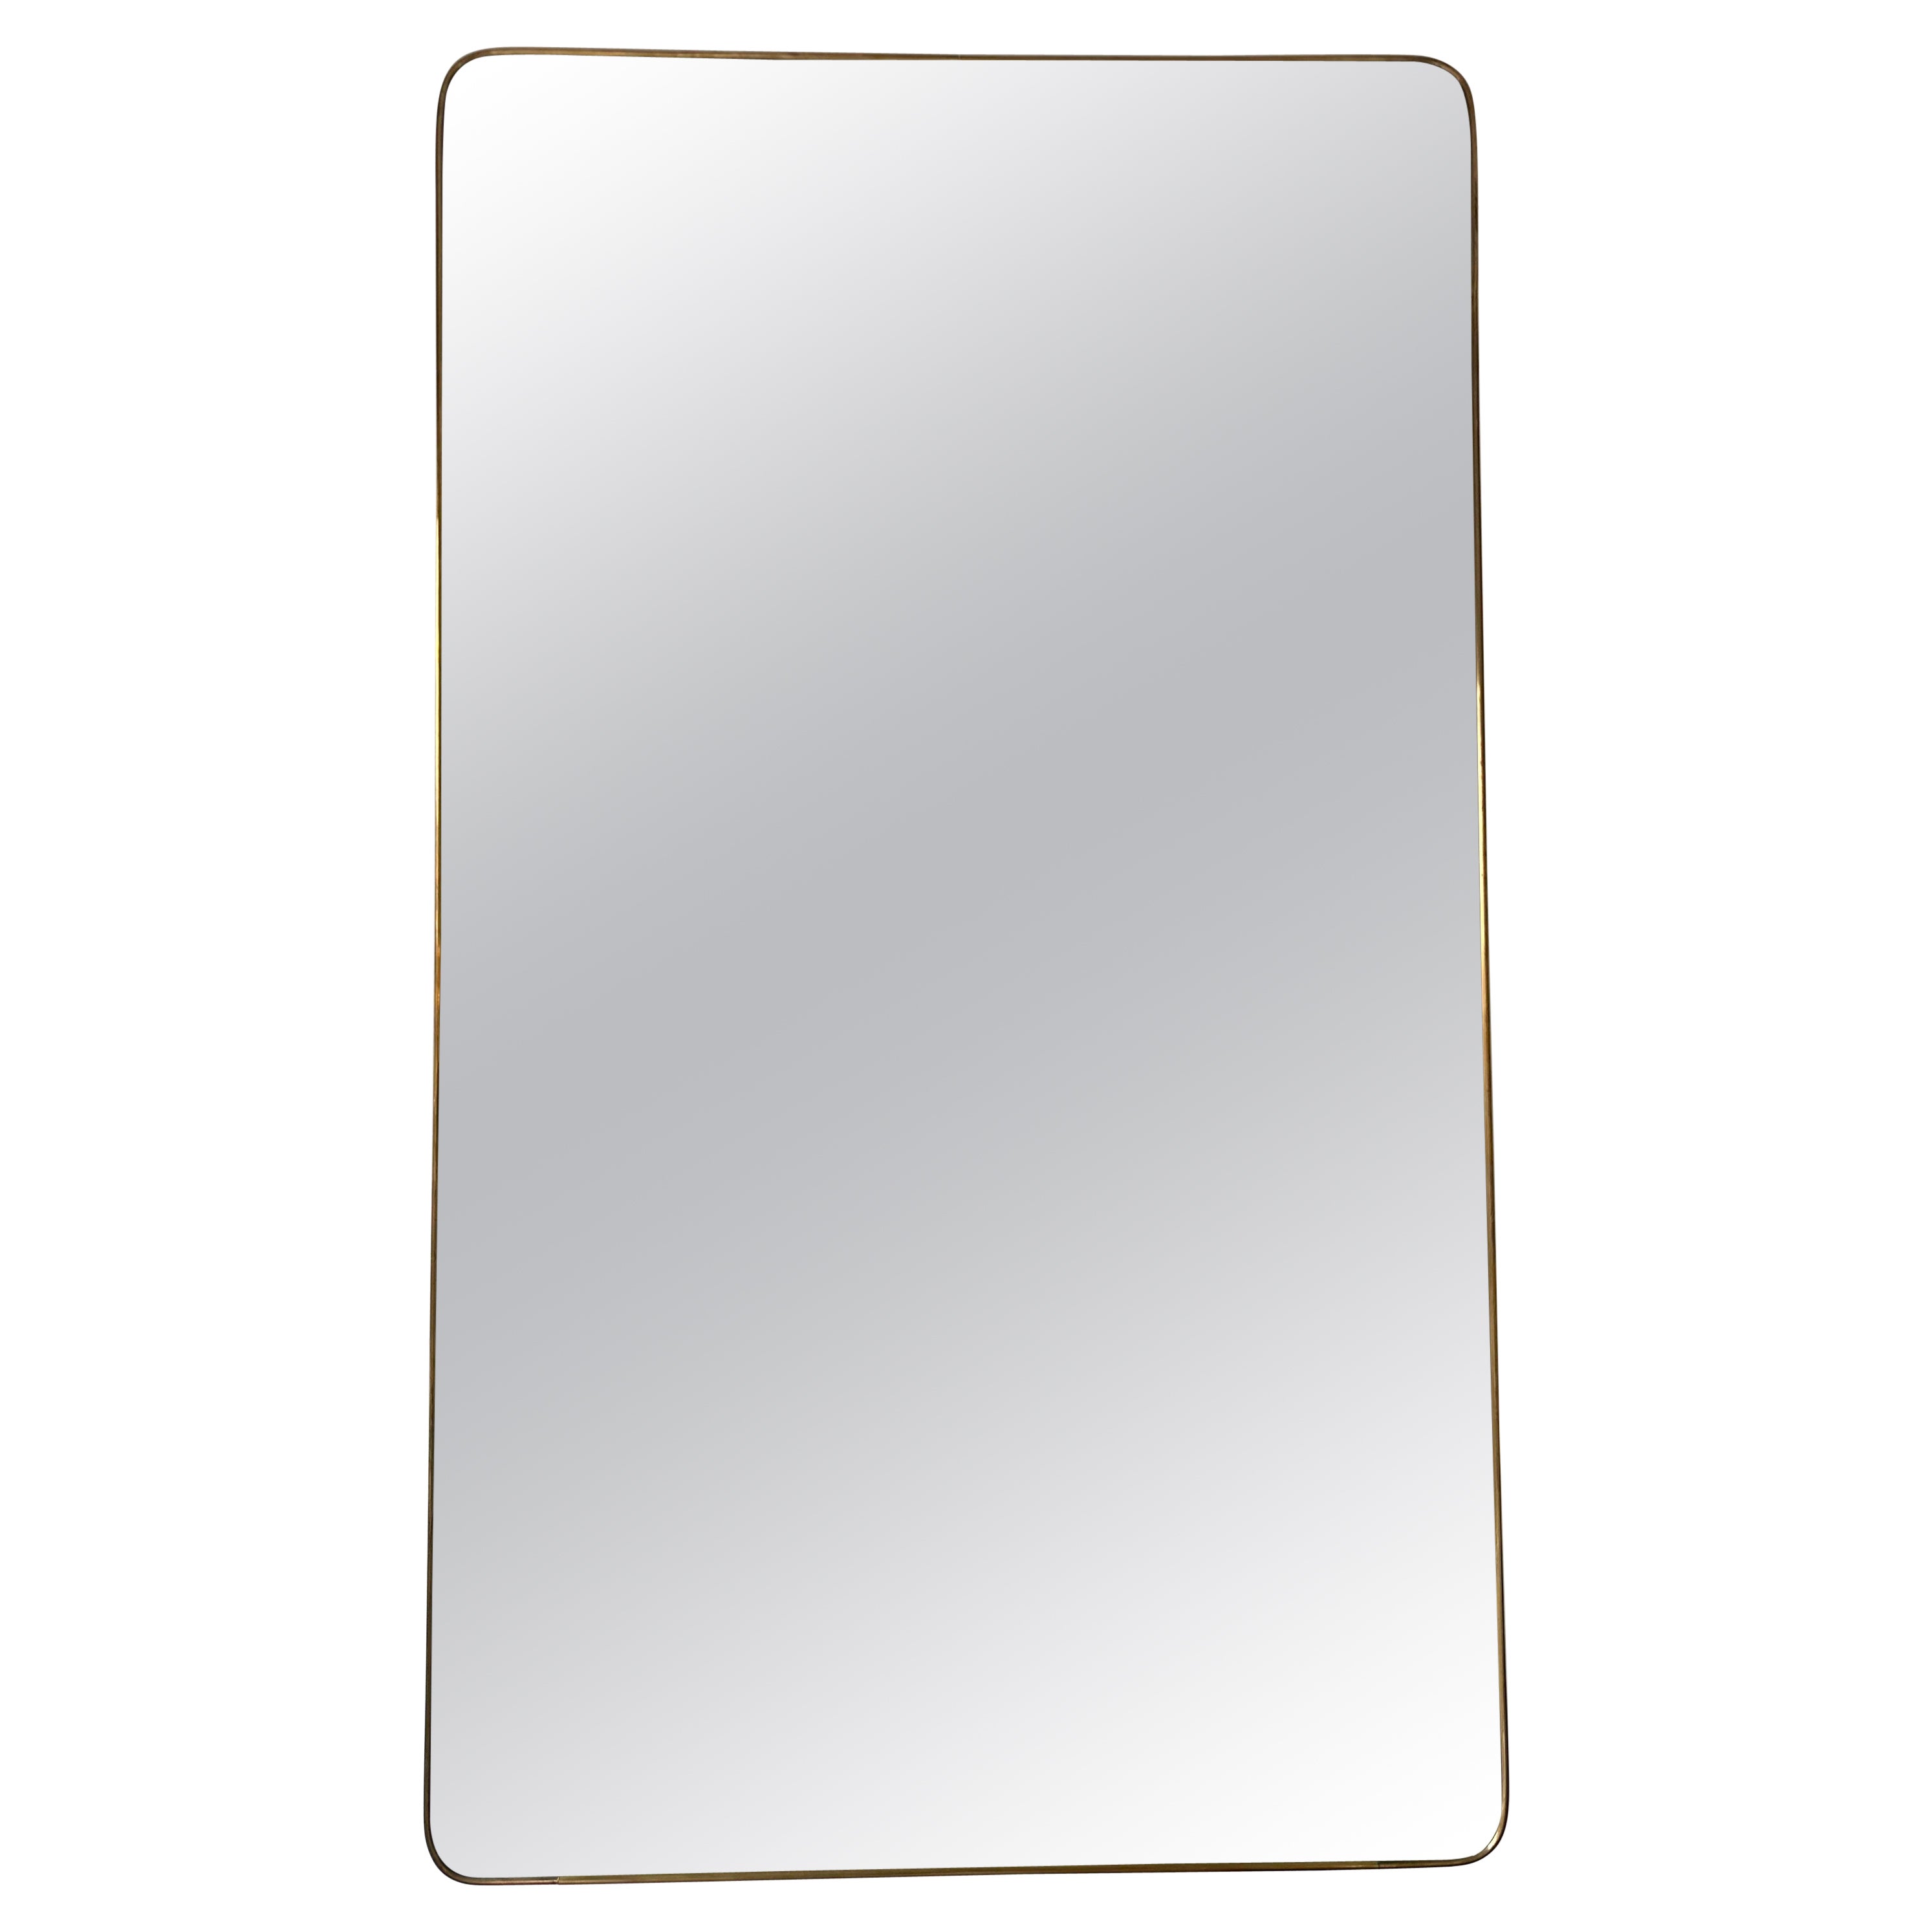 Extra Large Mid-Century Modern Brass Frame Mirror, Italy, 1950s For Sale